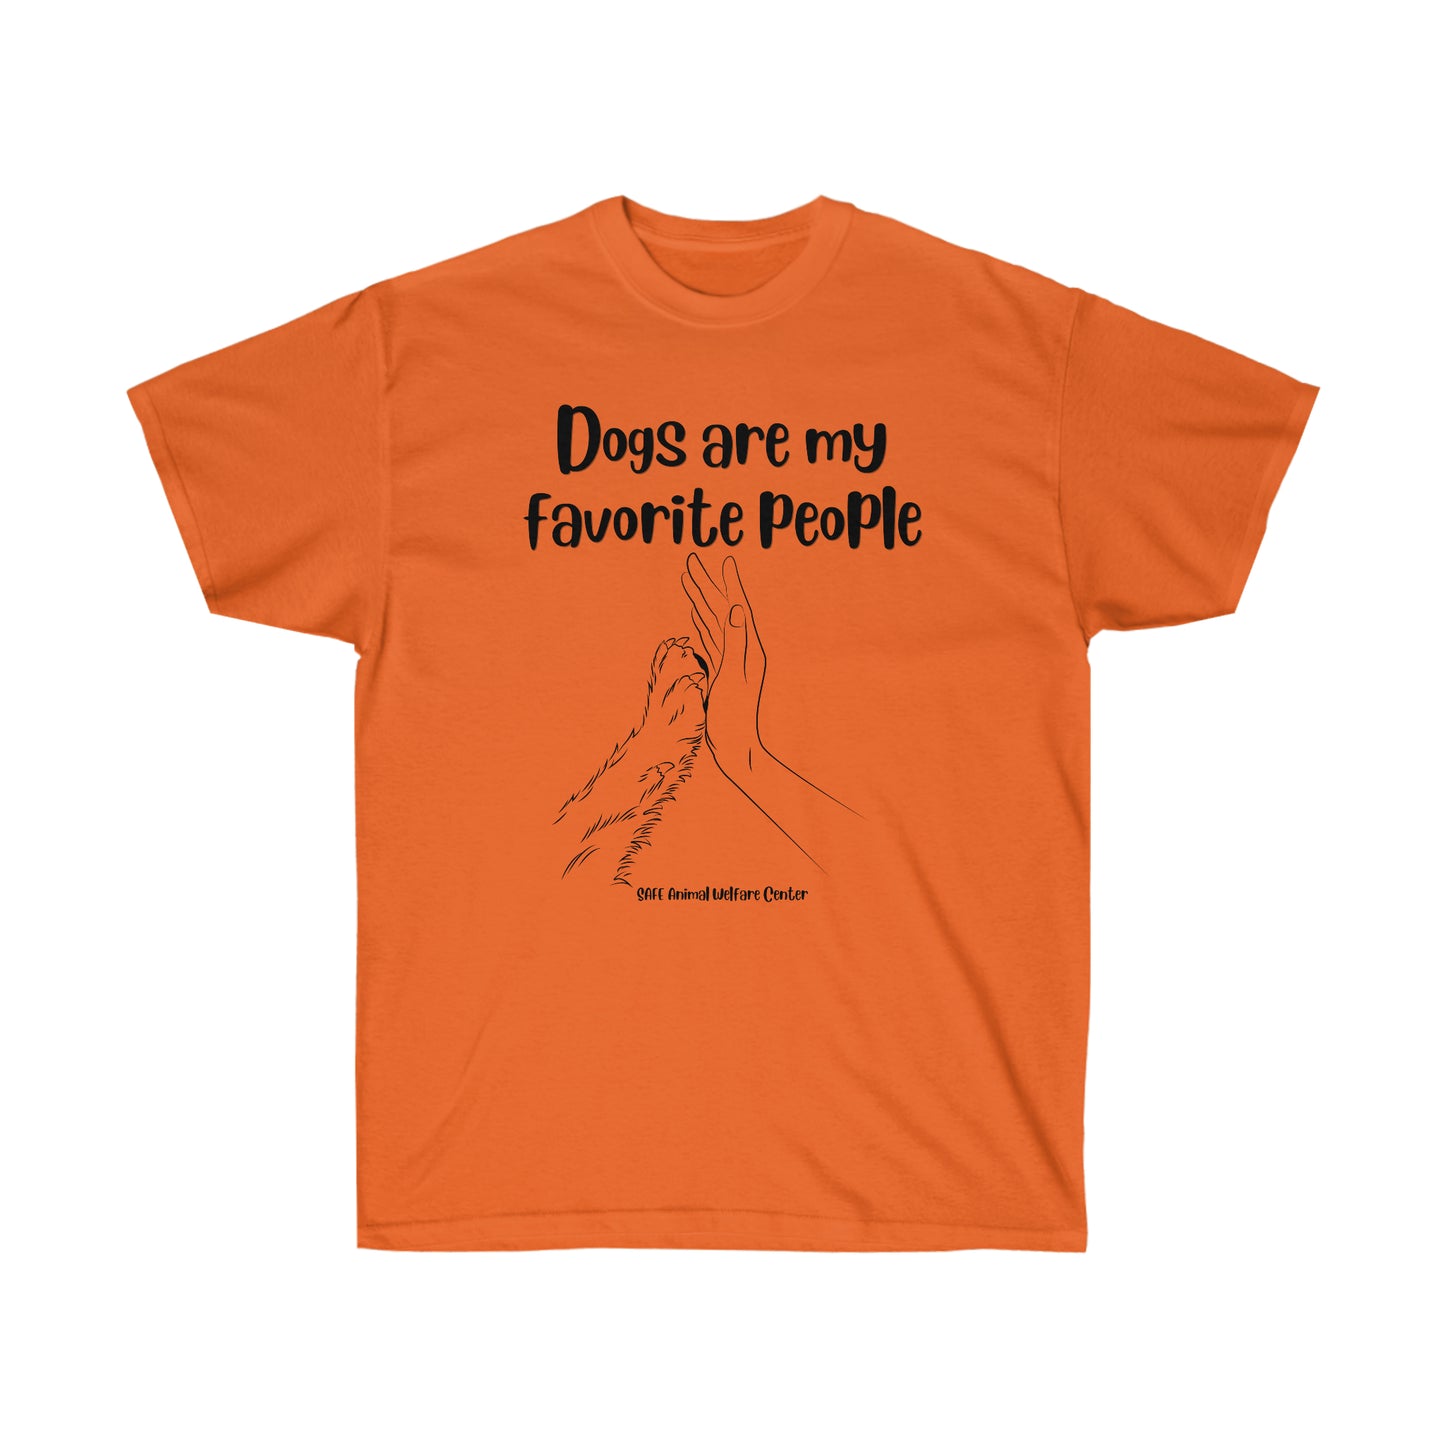 Dogs are my favorite people Unisex Ultra Cotton Tee